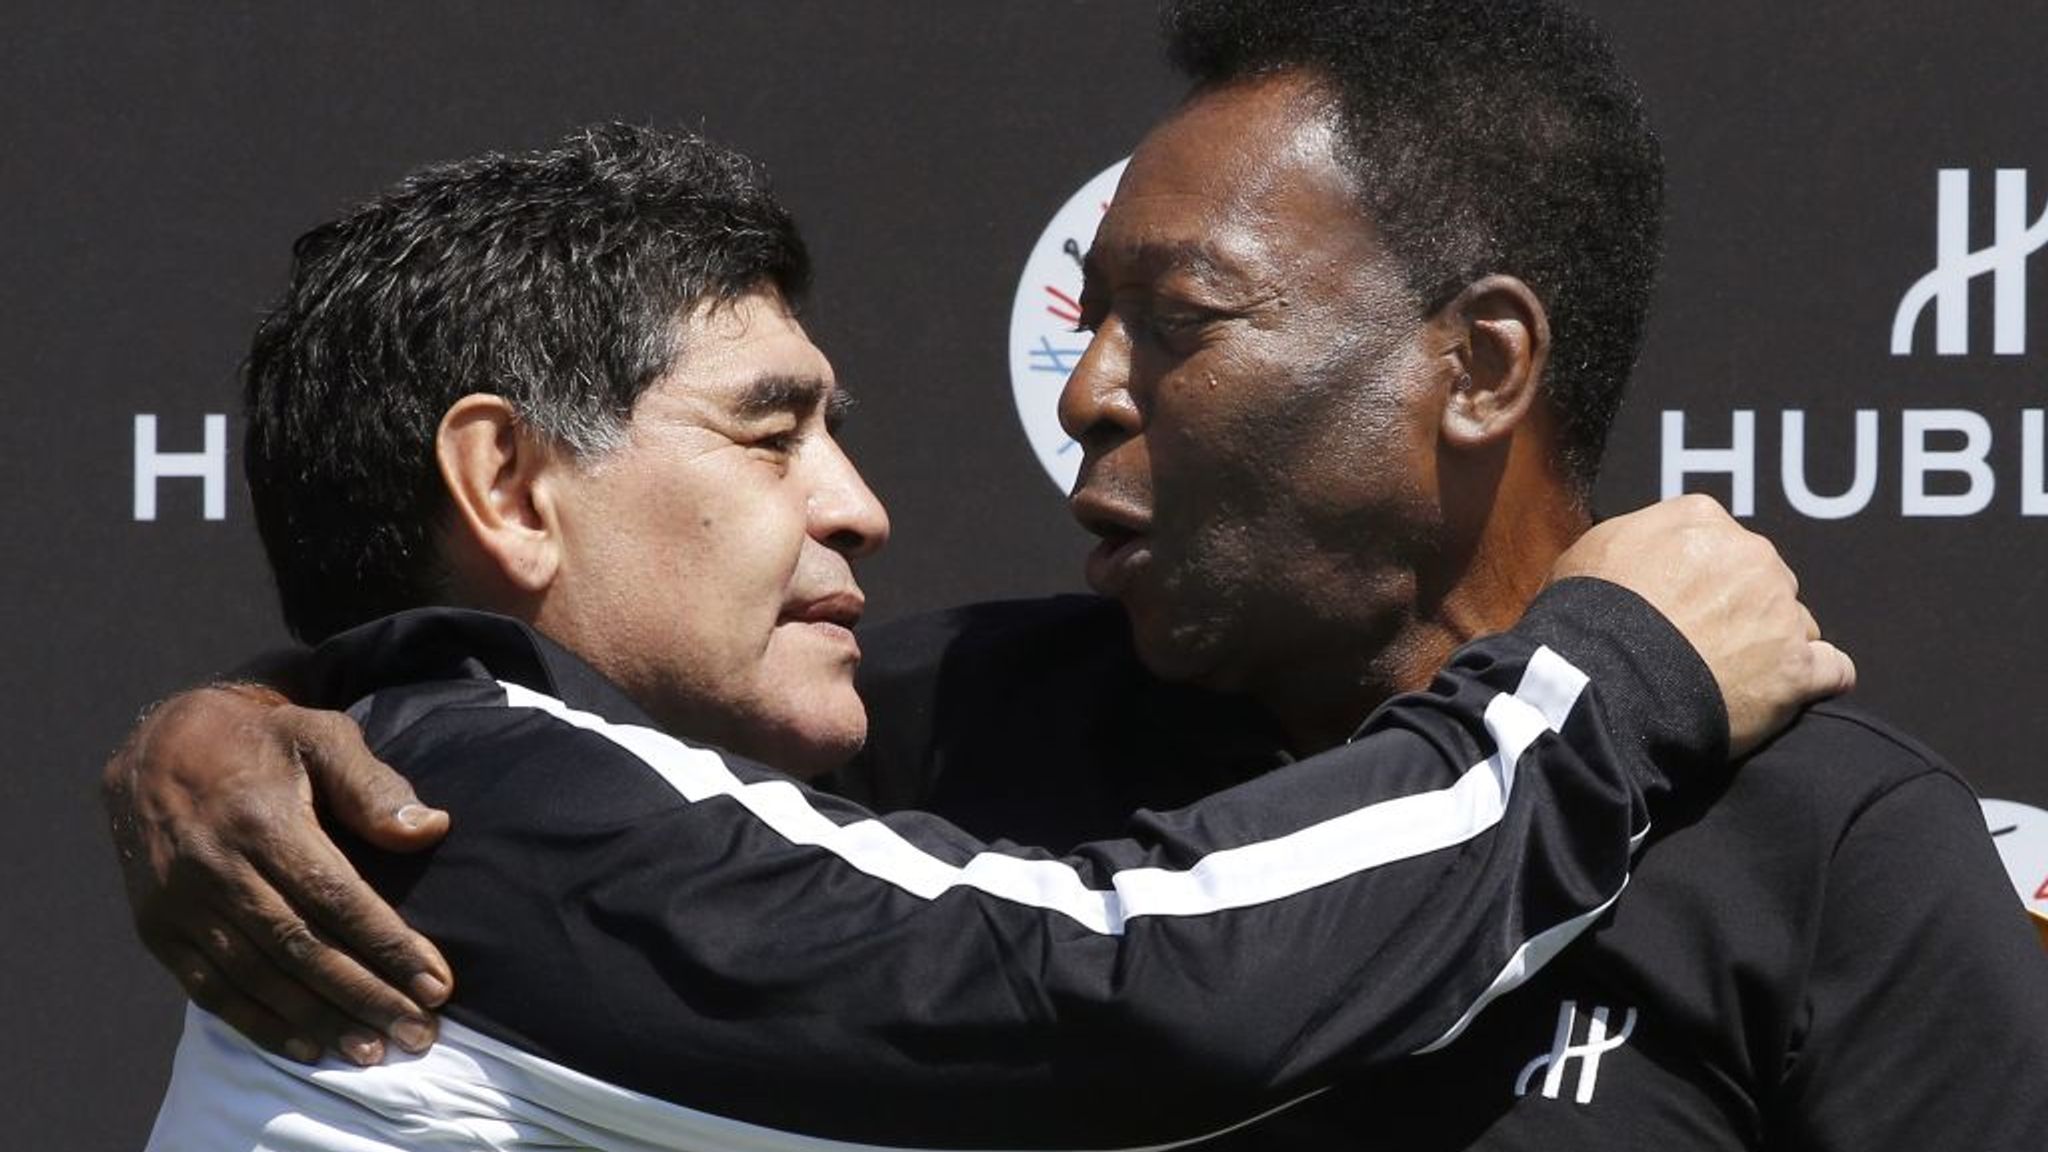 Pele's tribute to Diego Maradona: I hope to play football with him in the sky one day